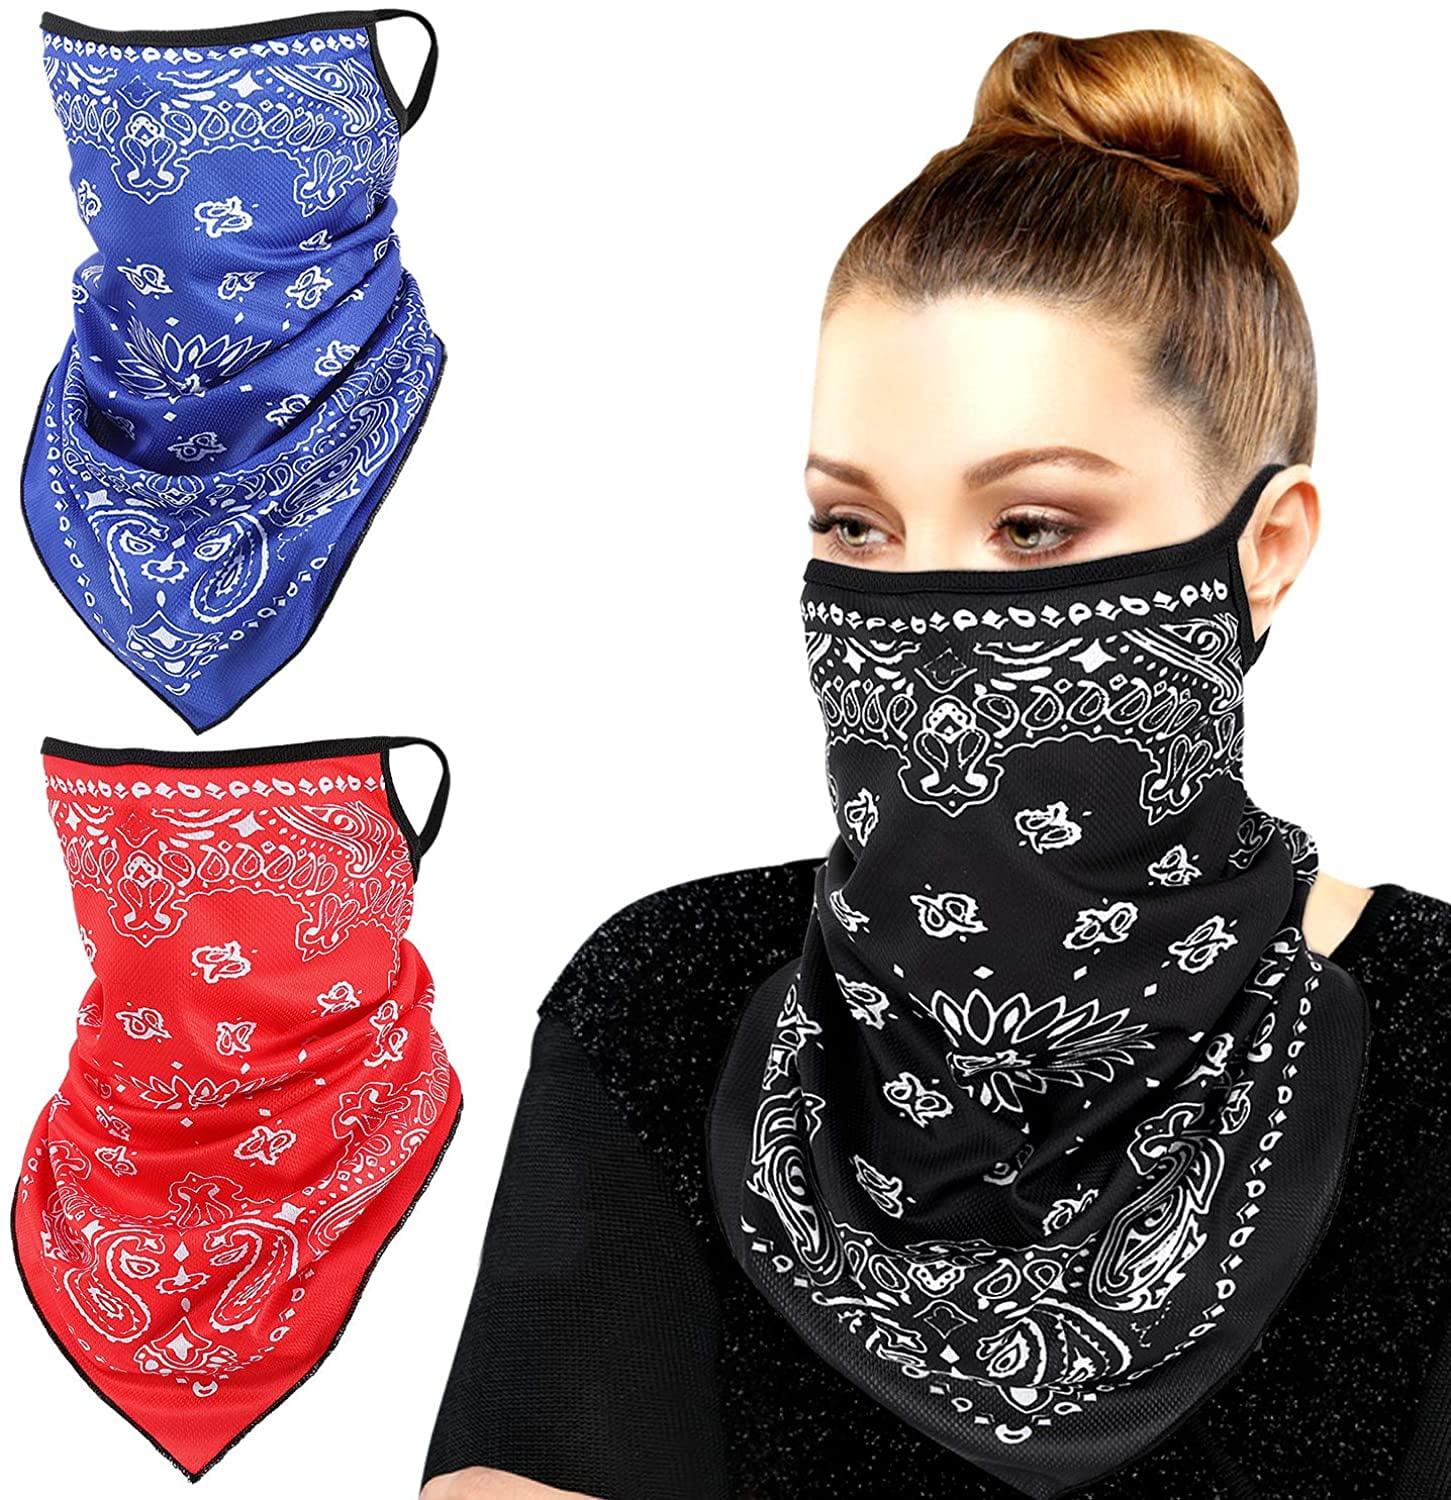 Outdoor Neck Warm Scarf Ski Motorcycle Cycling Bandana Dust-proof Half Face Mask 